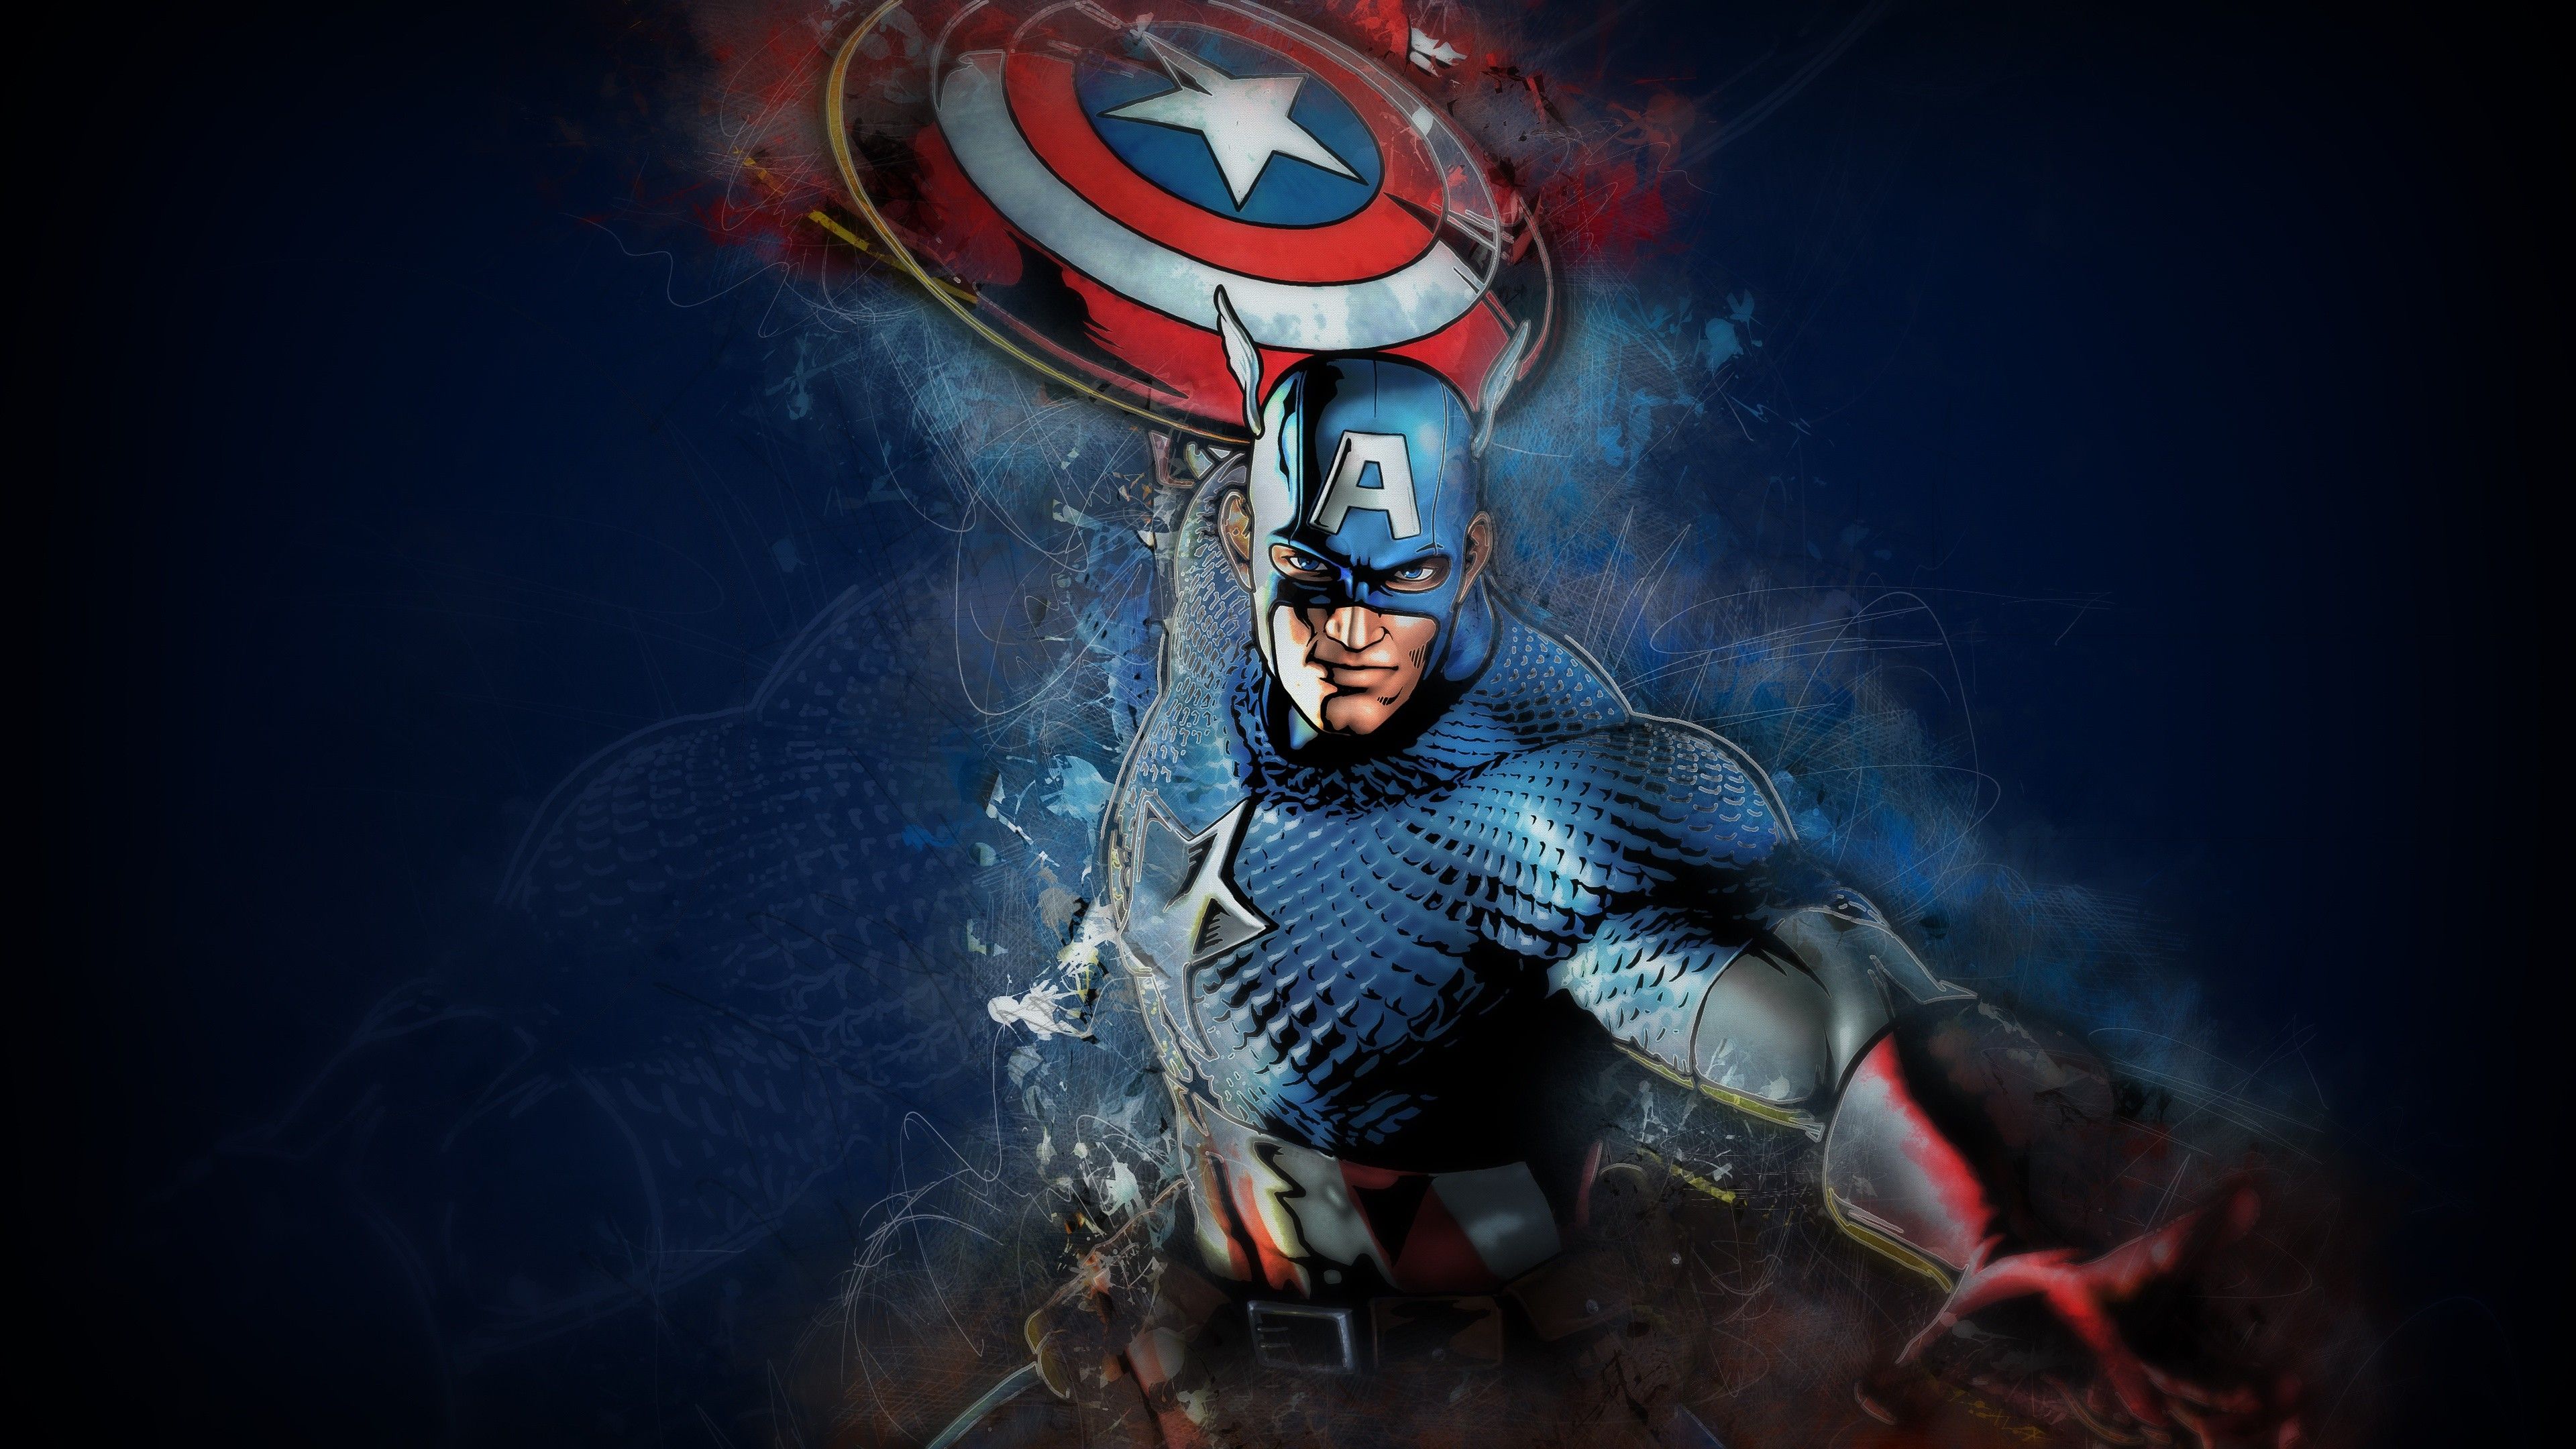 Captain 4K wallpaper for your desktop or mobile screen free and easy to download